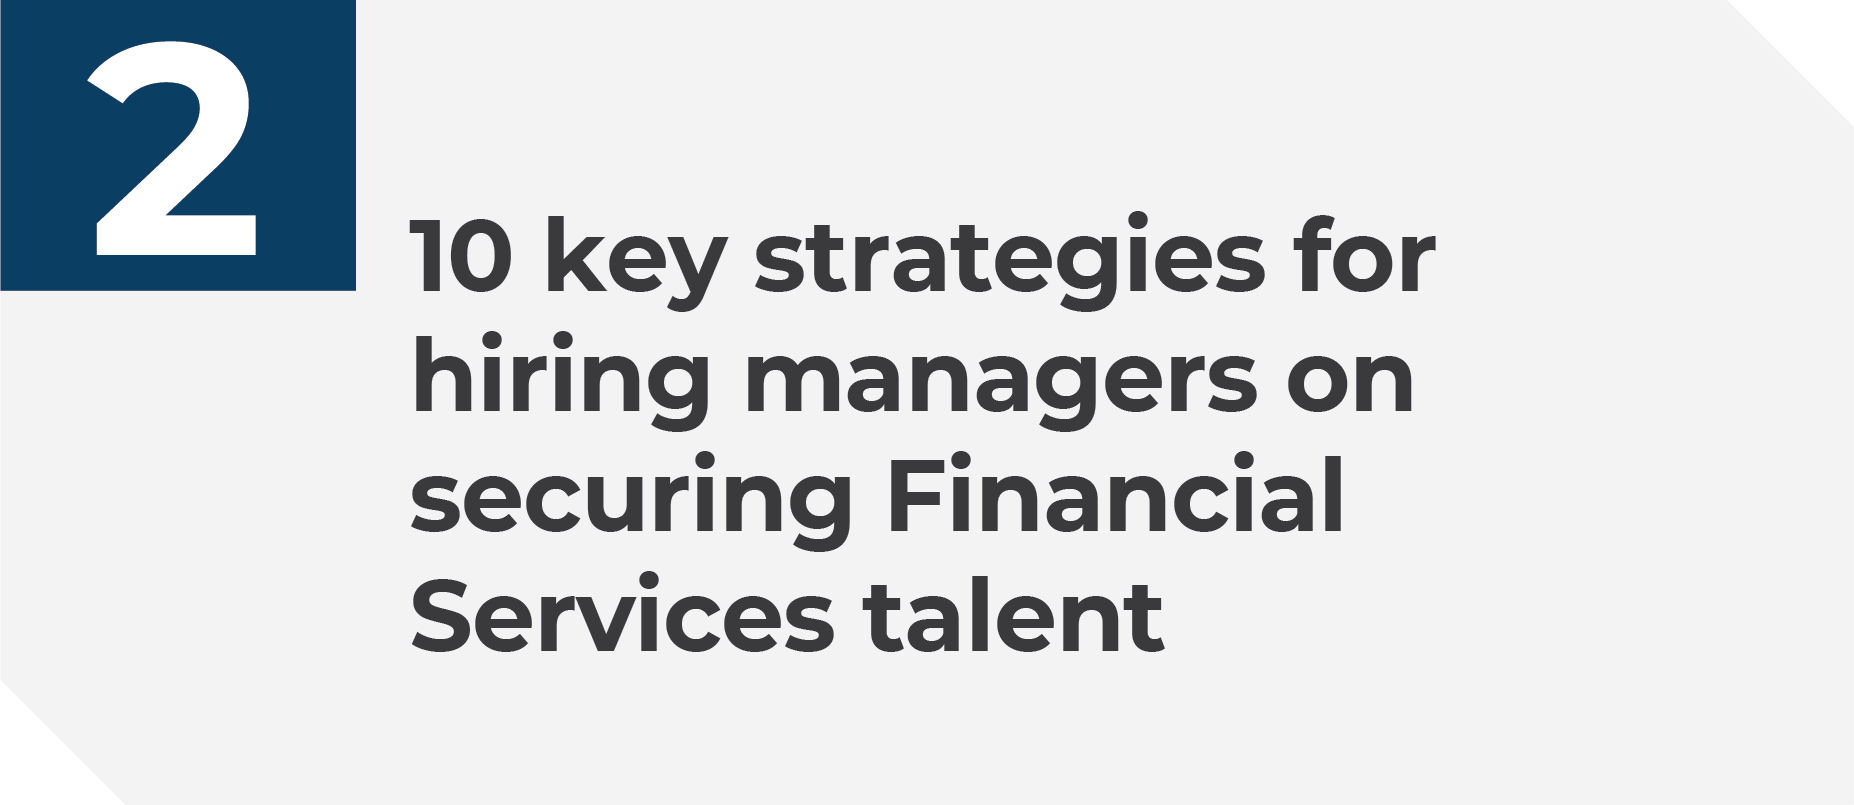 -10 key strategies for hiring managers on how to secure Financial Services talent